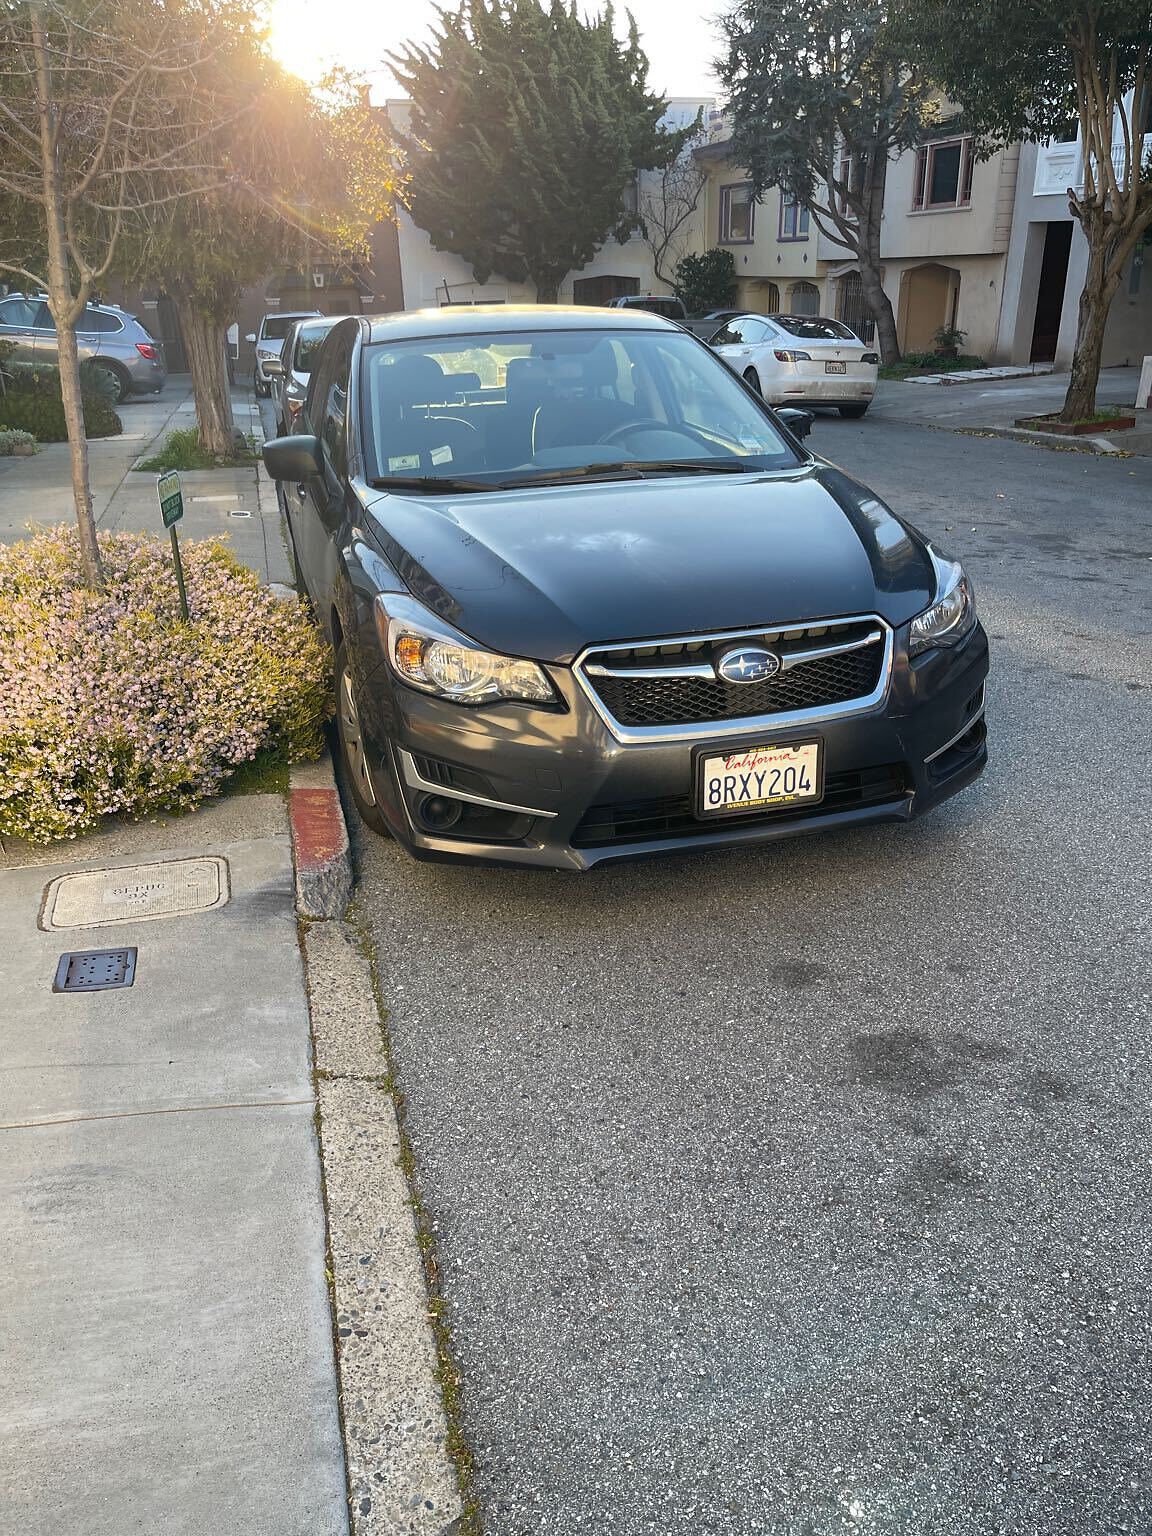 Photo of car in the street with license plate 8RXY204 in California